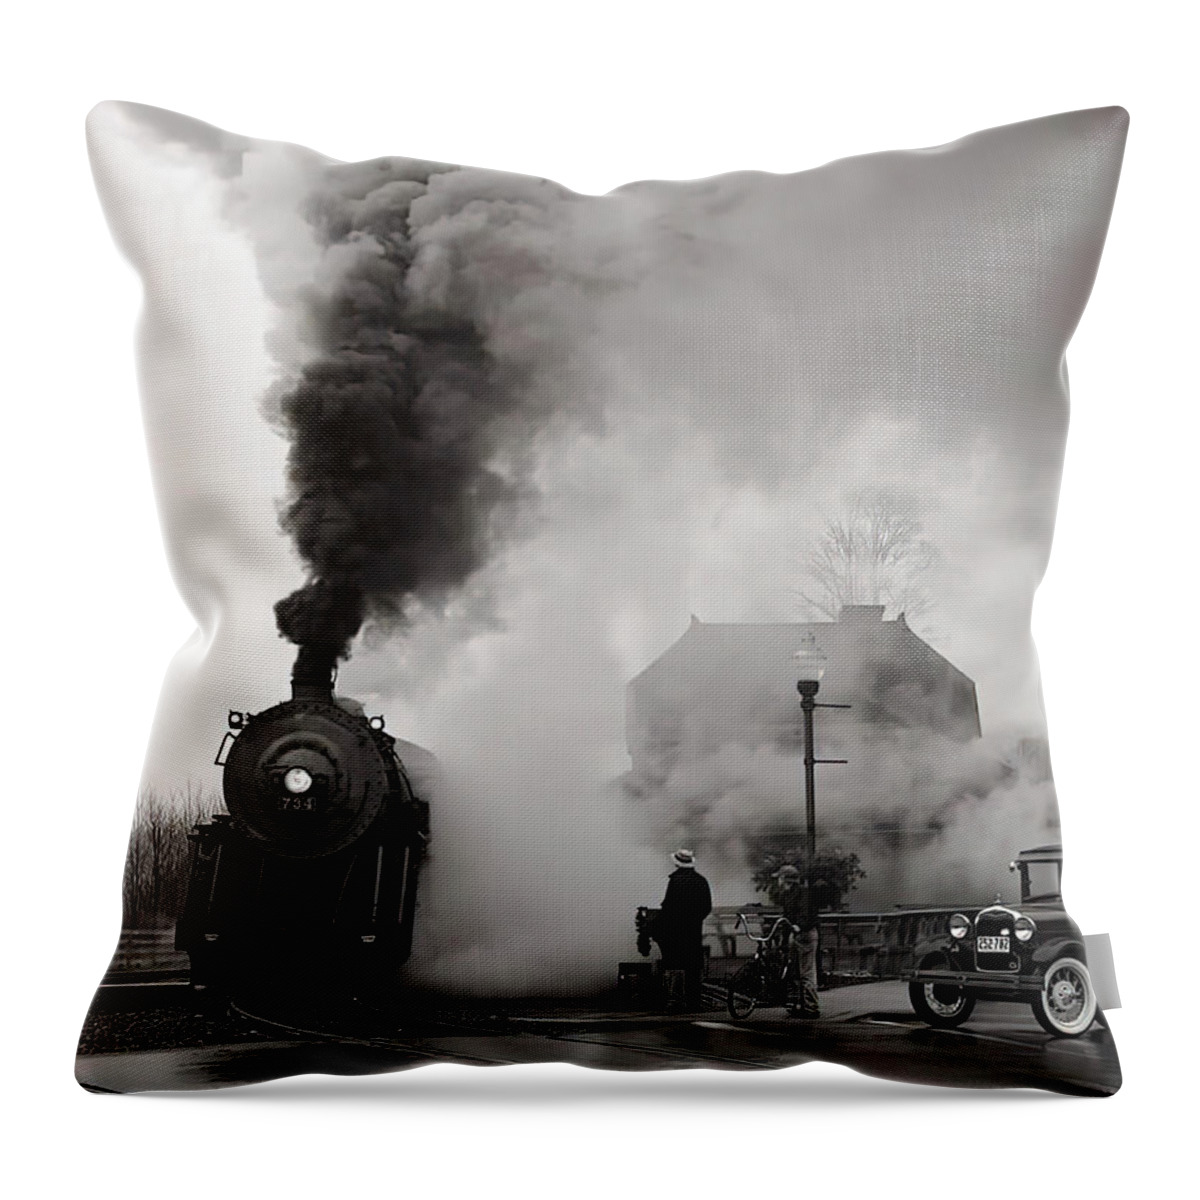 Vintage Throw Pillow featuring the photograph Image Of Steam Locomotive And Model A Ford At Intersection by Retrographs